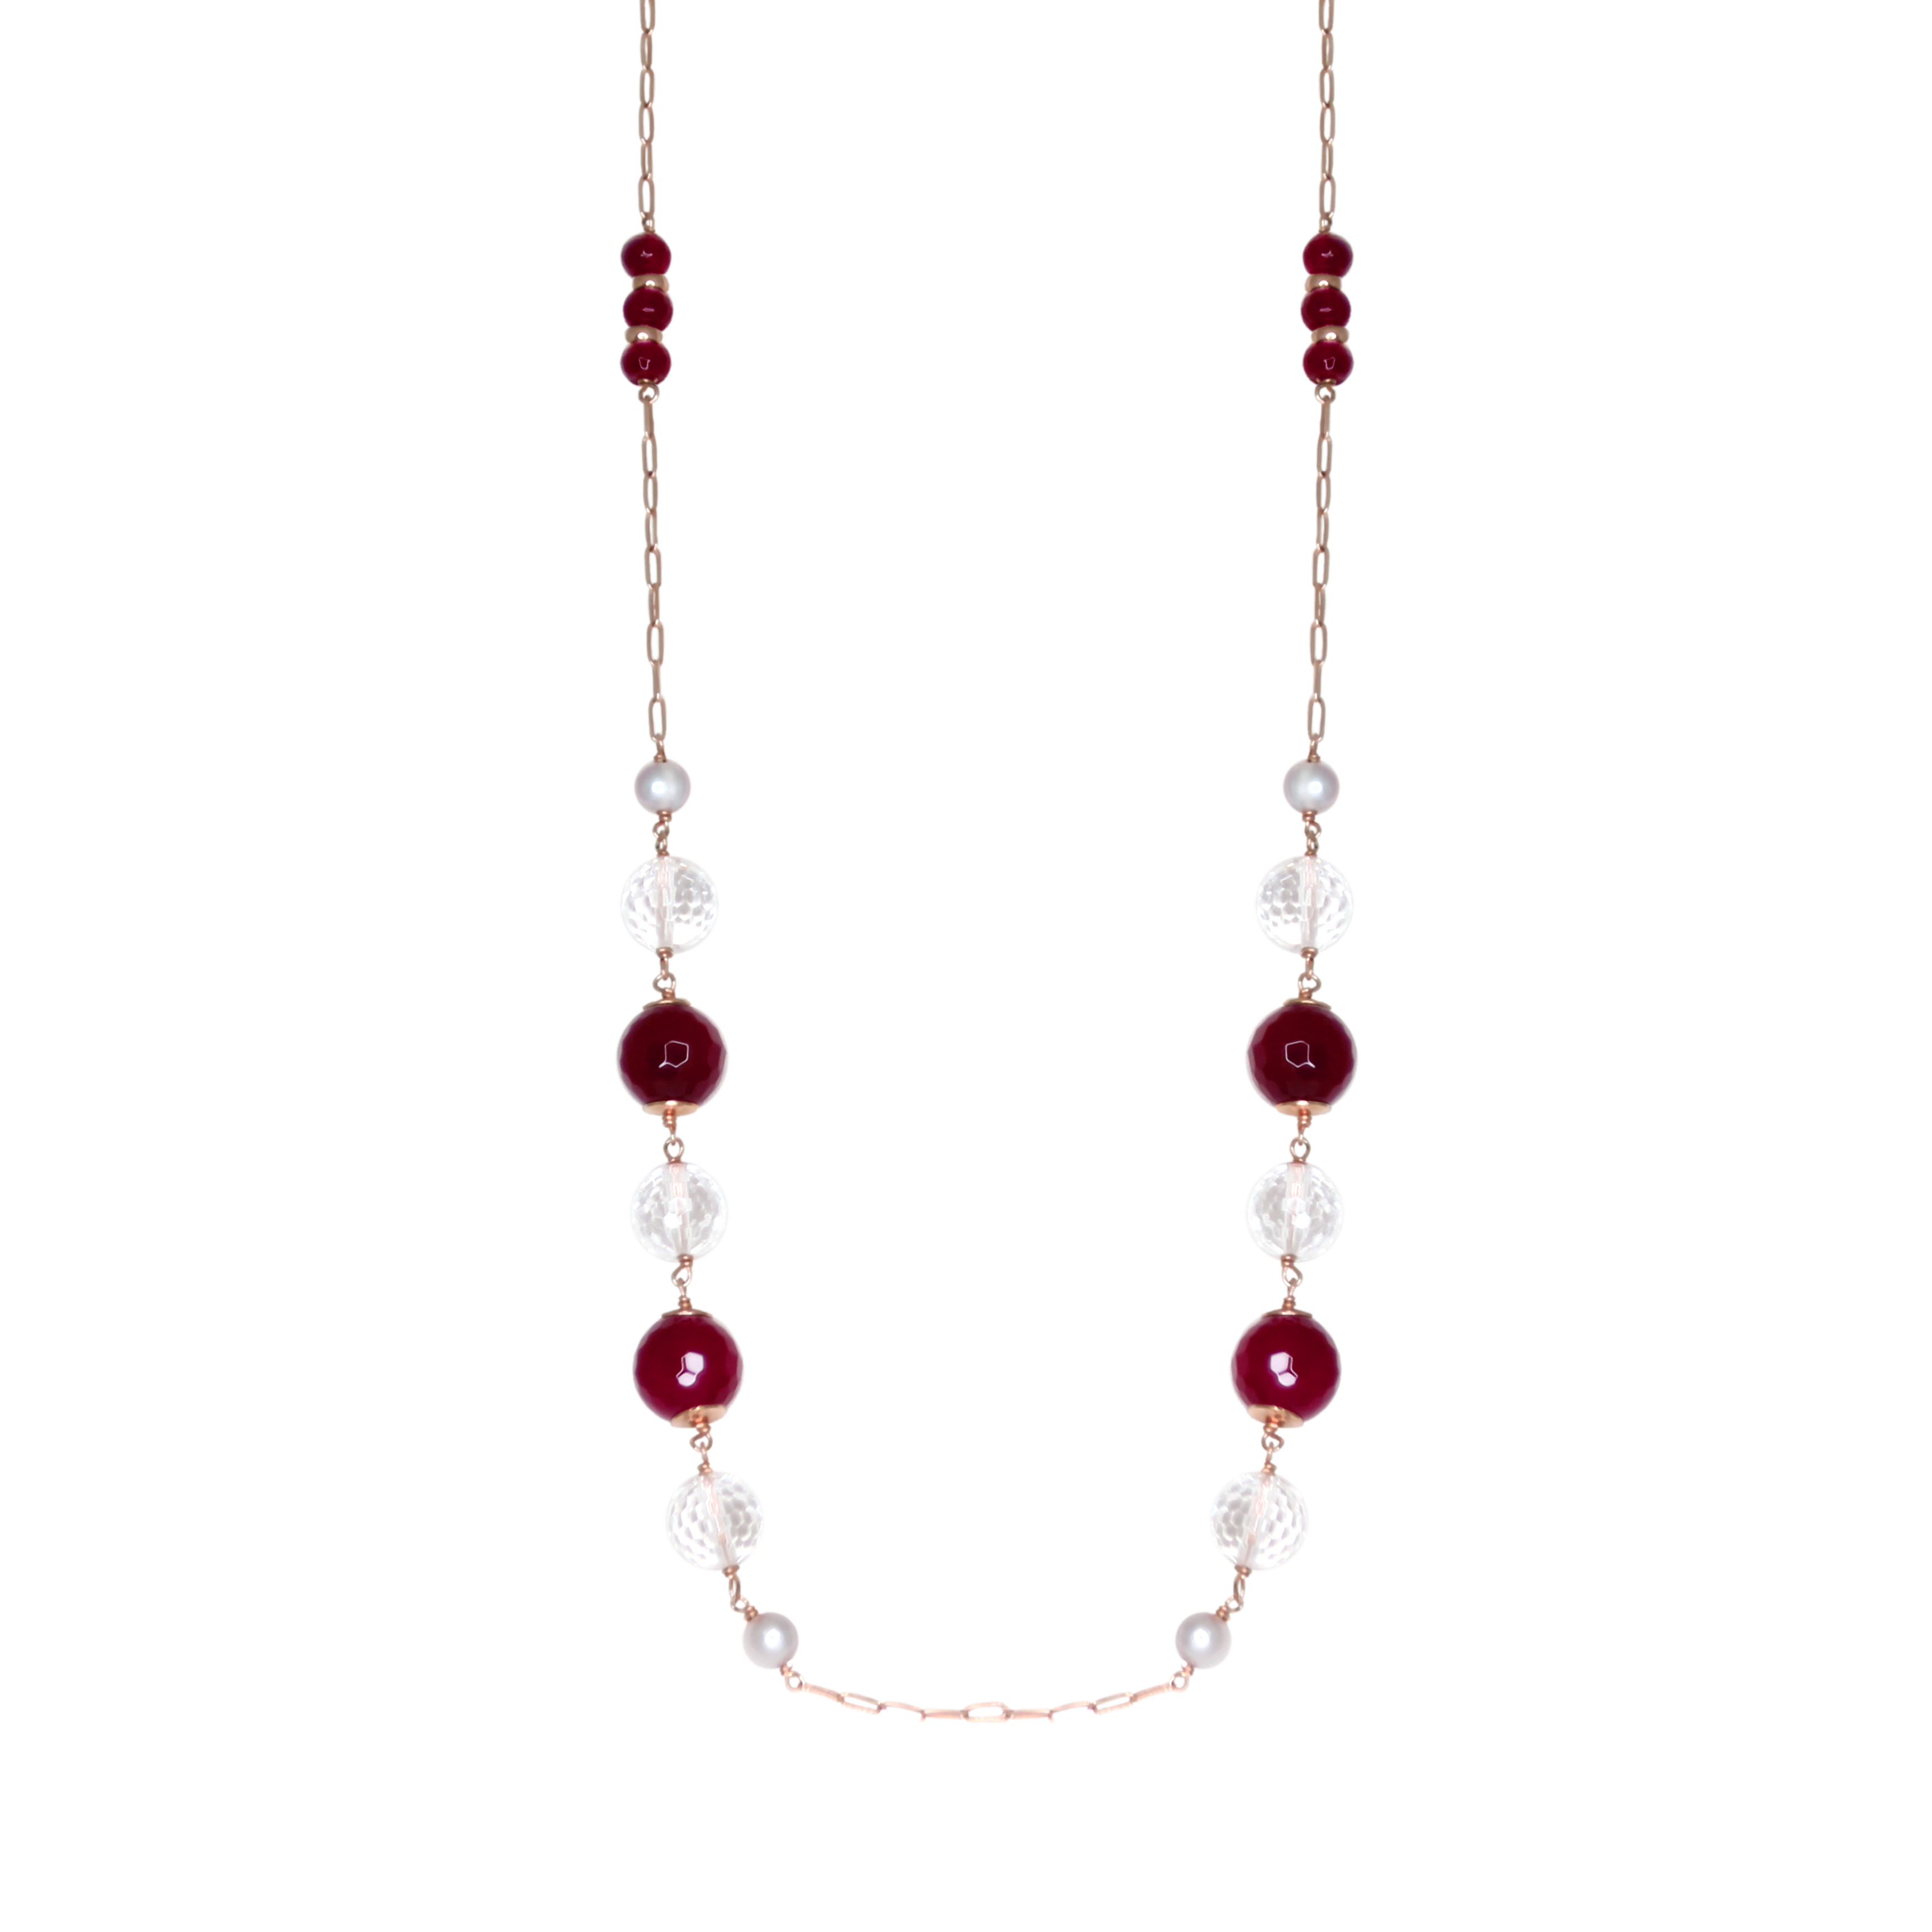 Red Agate, Silver Pearl & Clear Crystal Necklace - 120cm